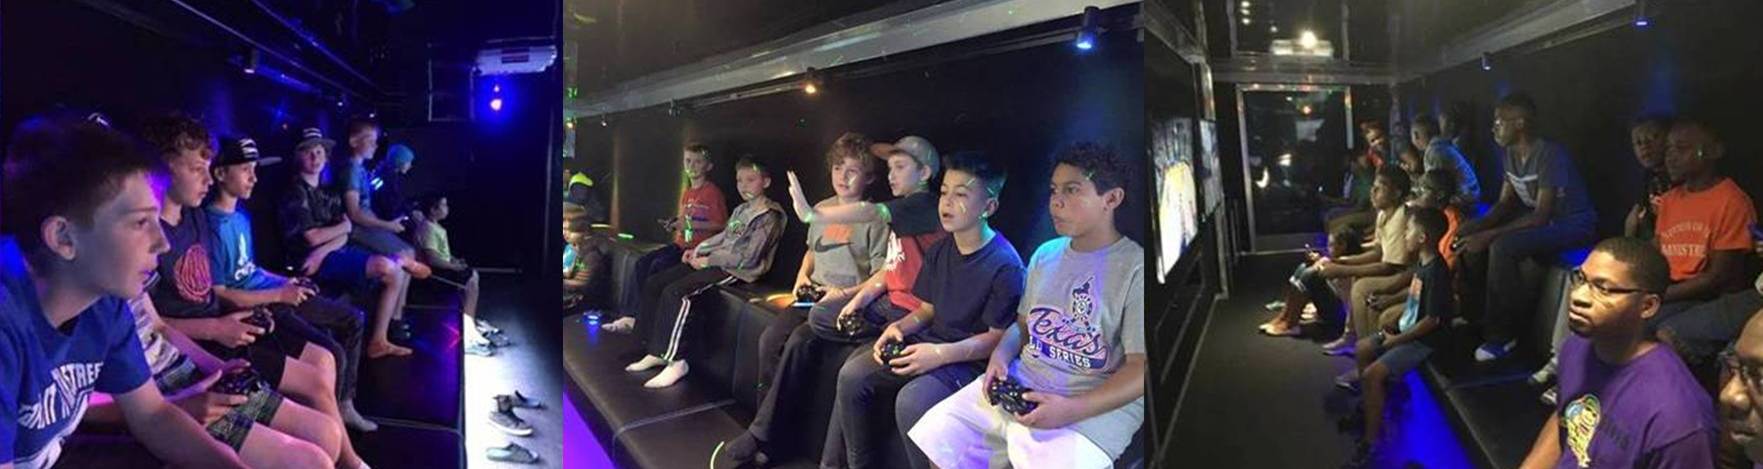 Video game truck party in Oklahoma City